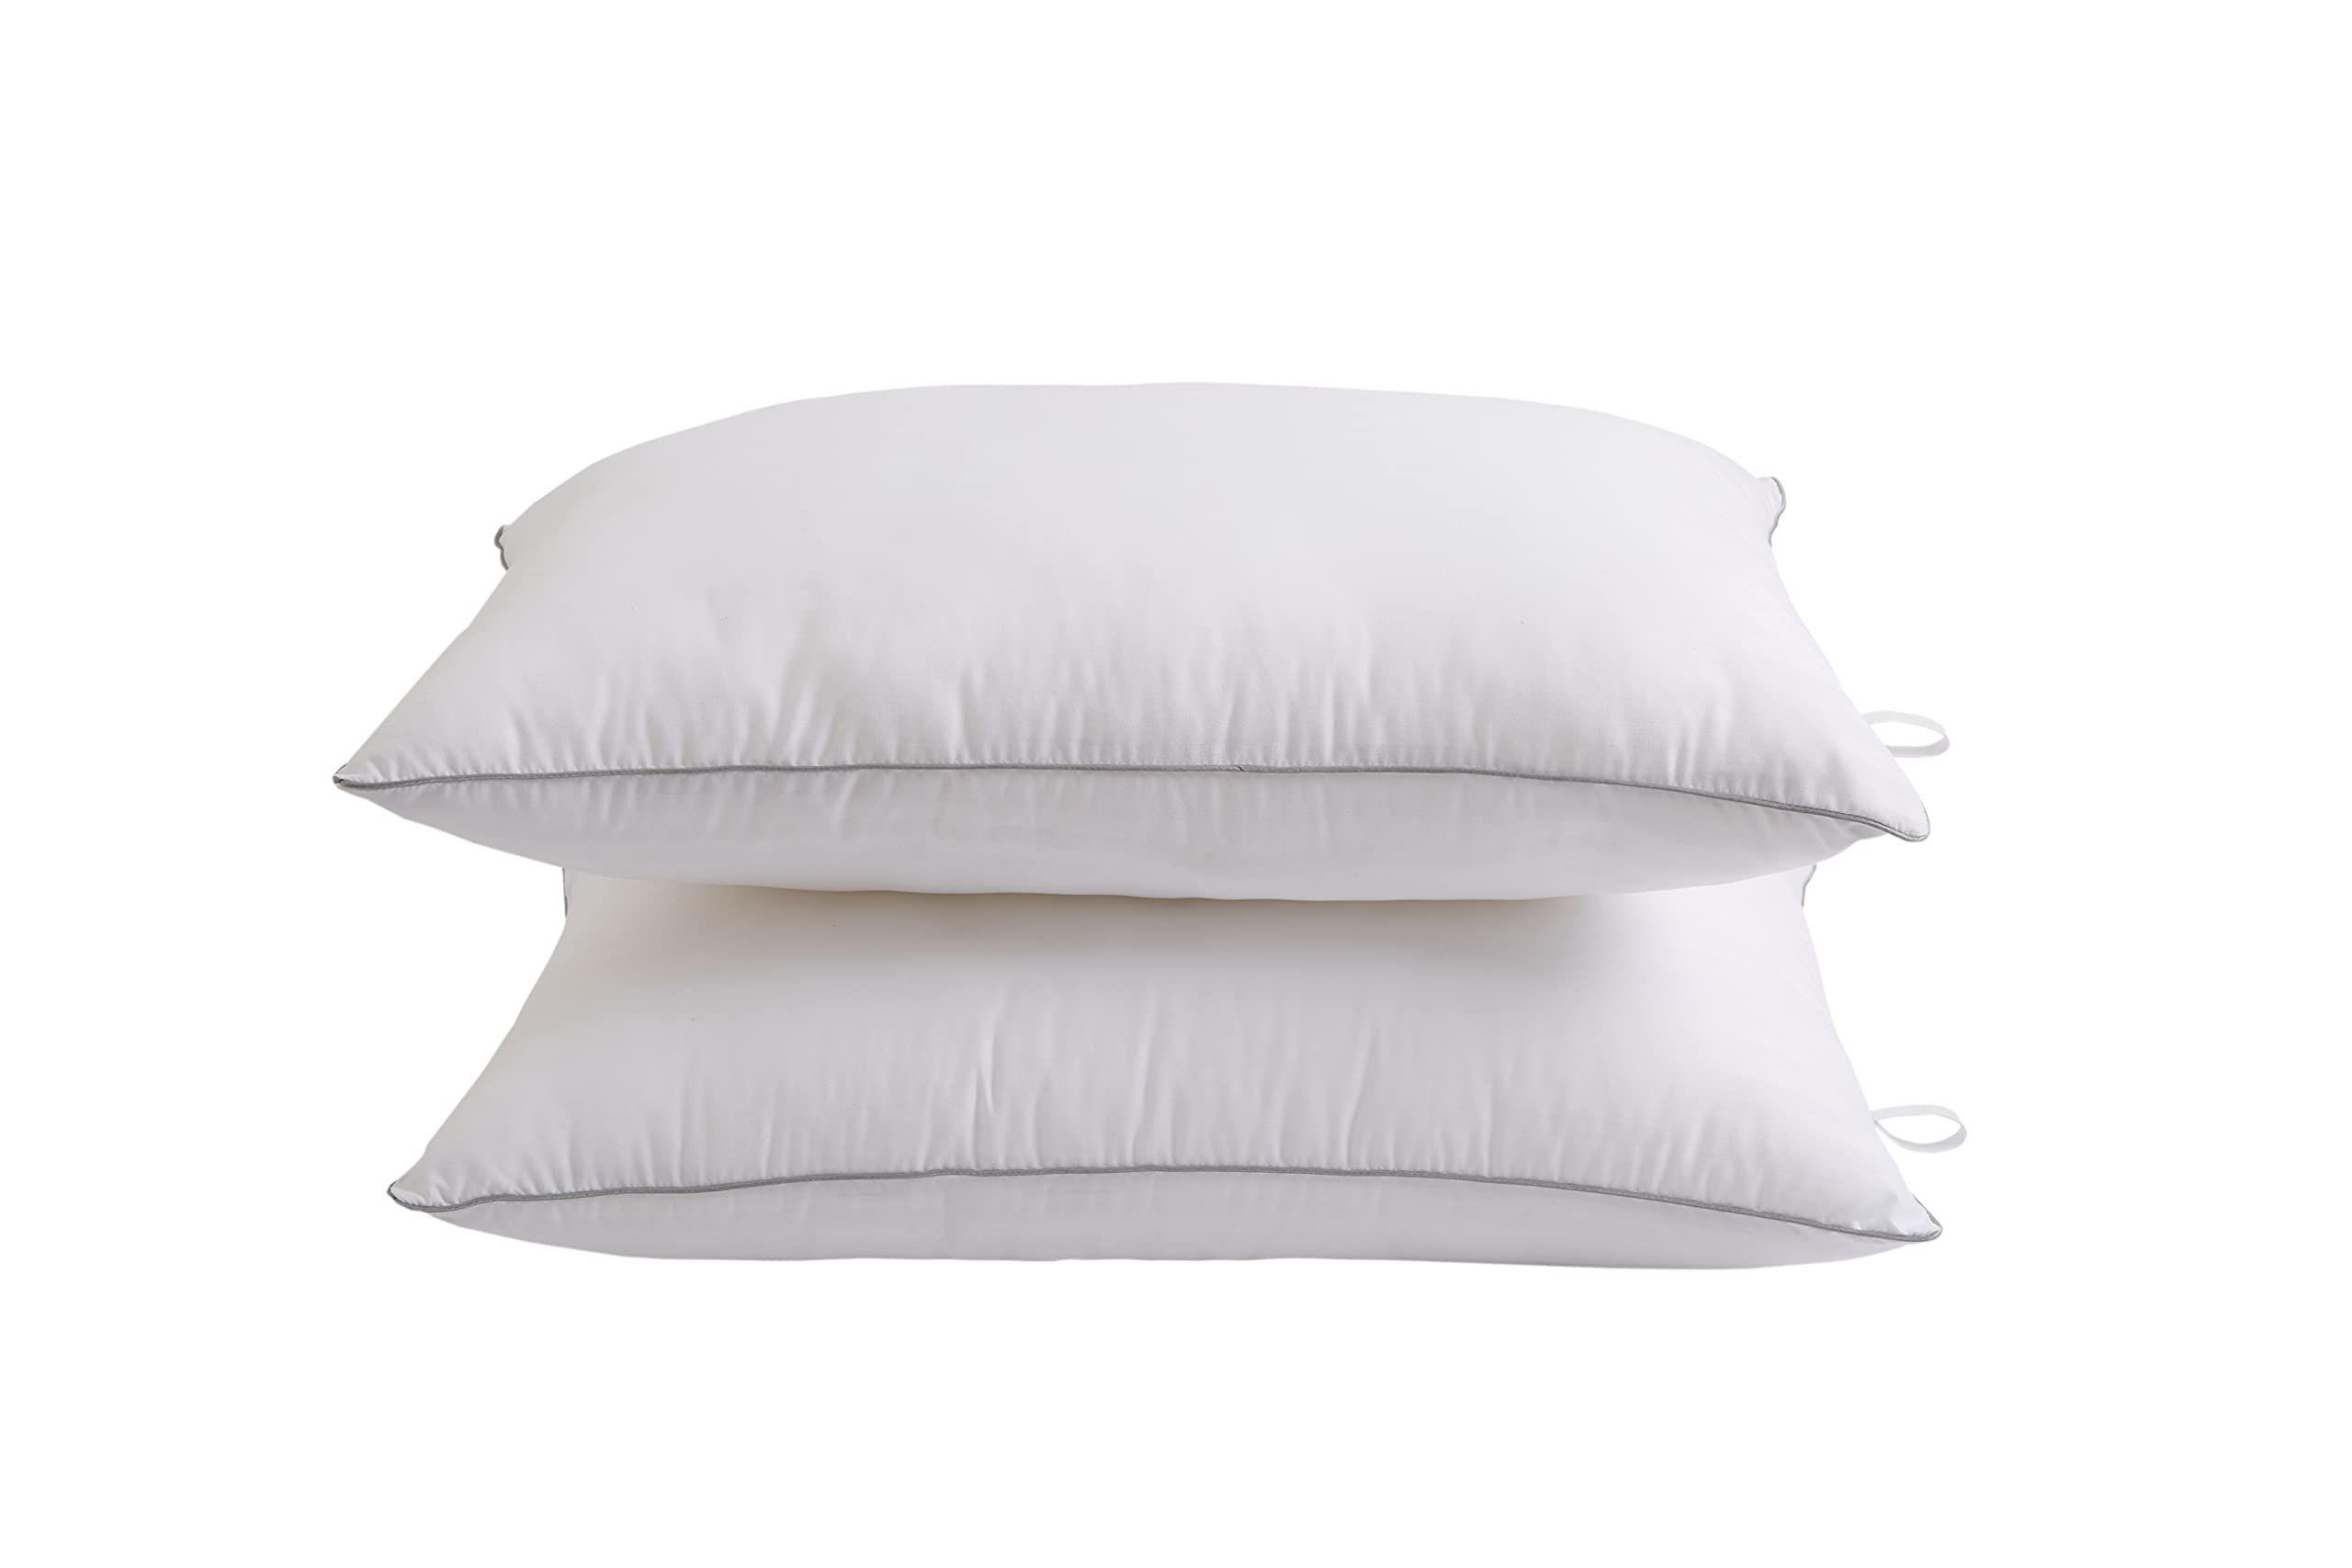 Polyester Pillow Inserts with Cotton Cover